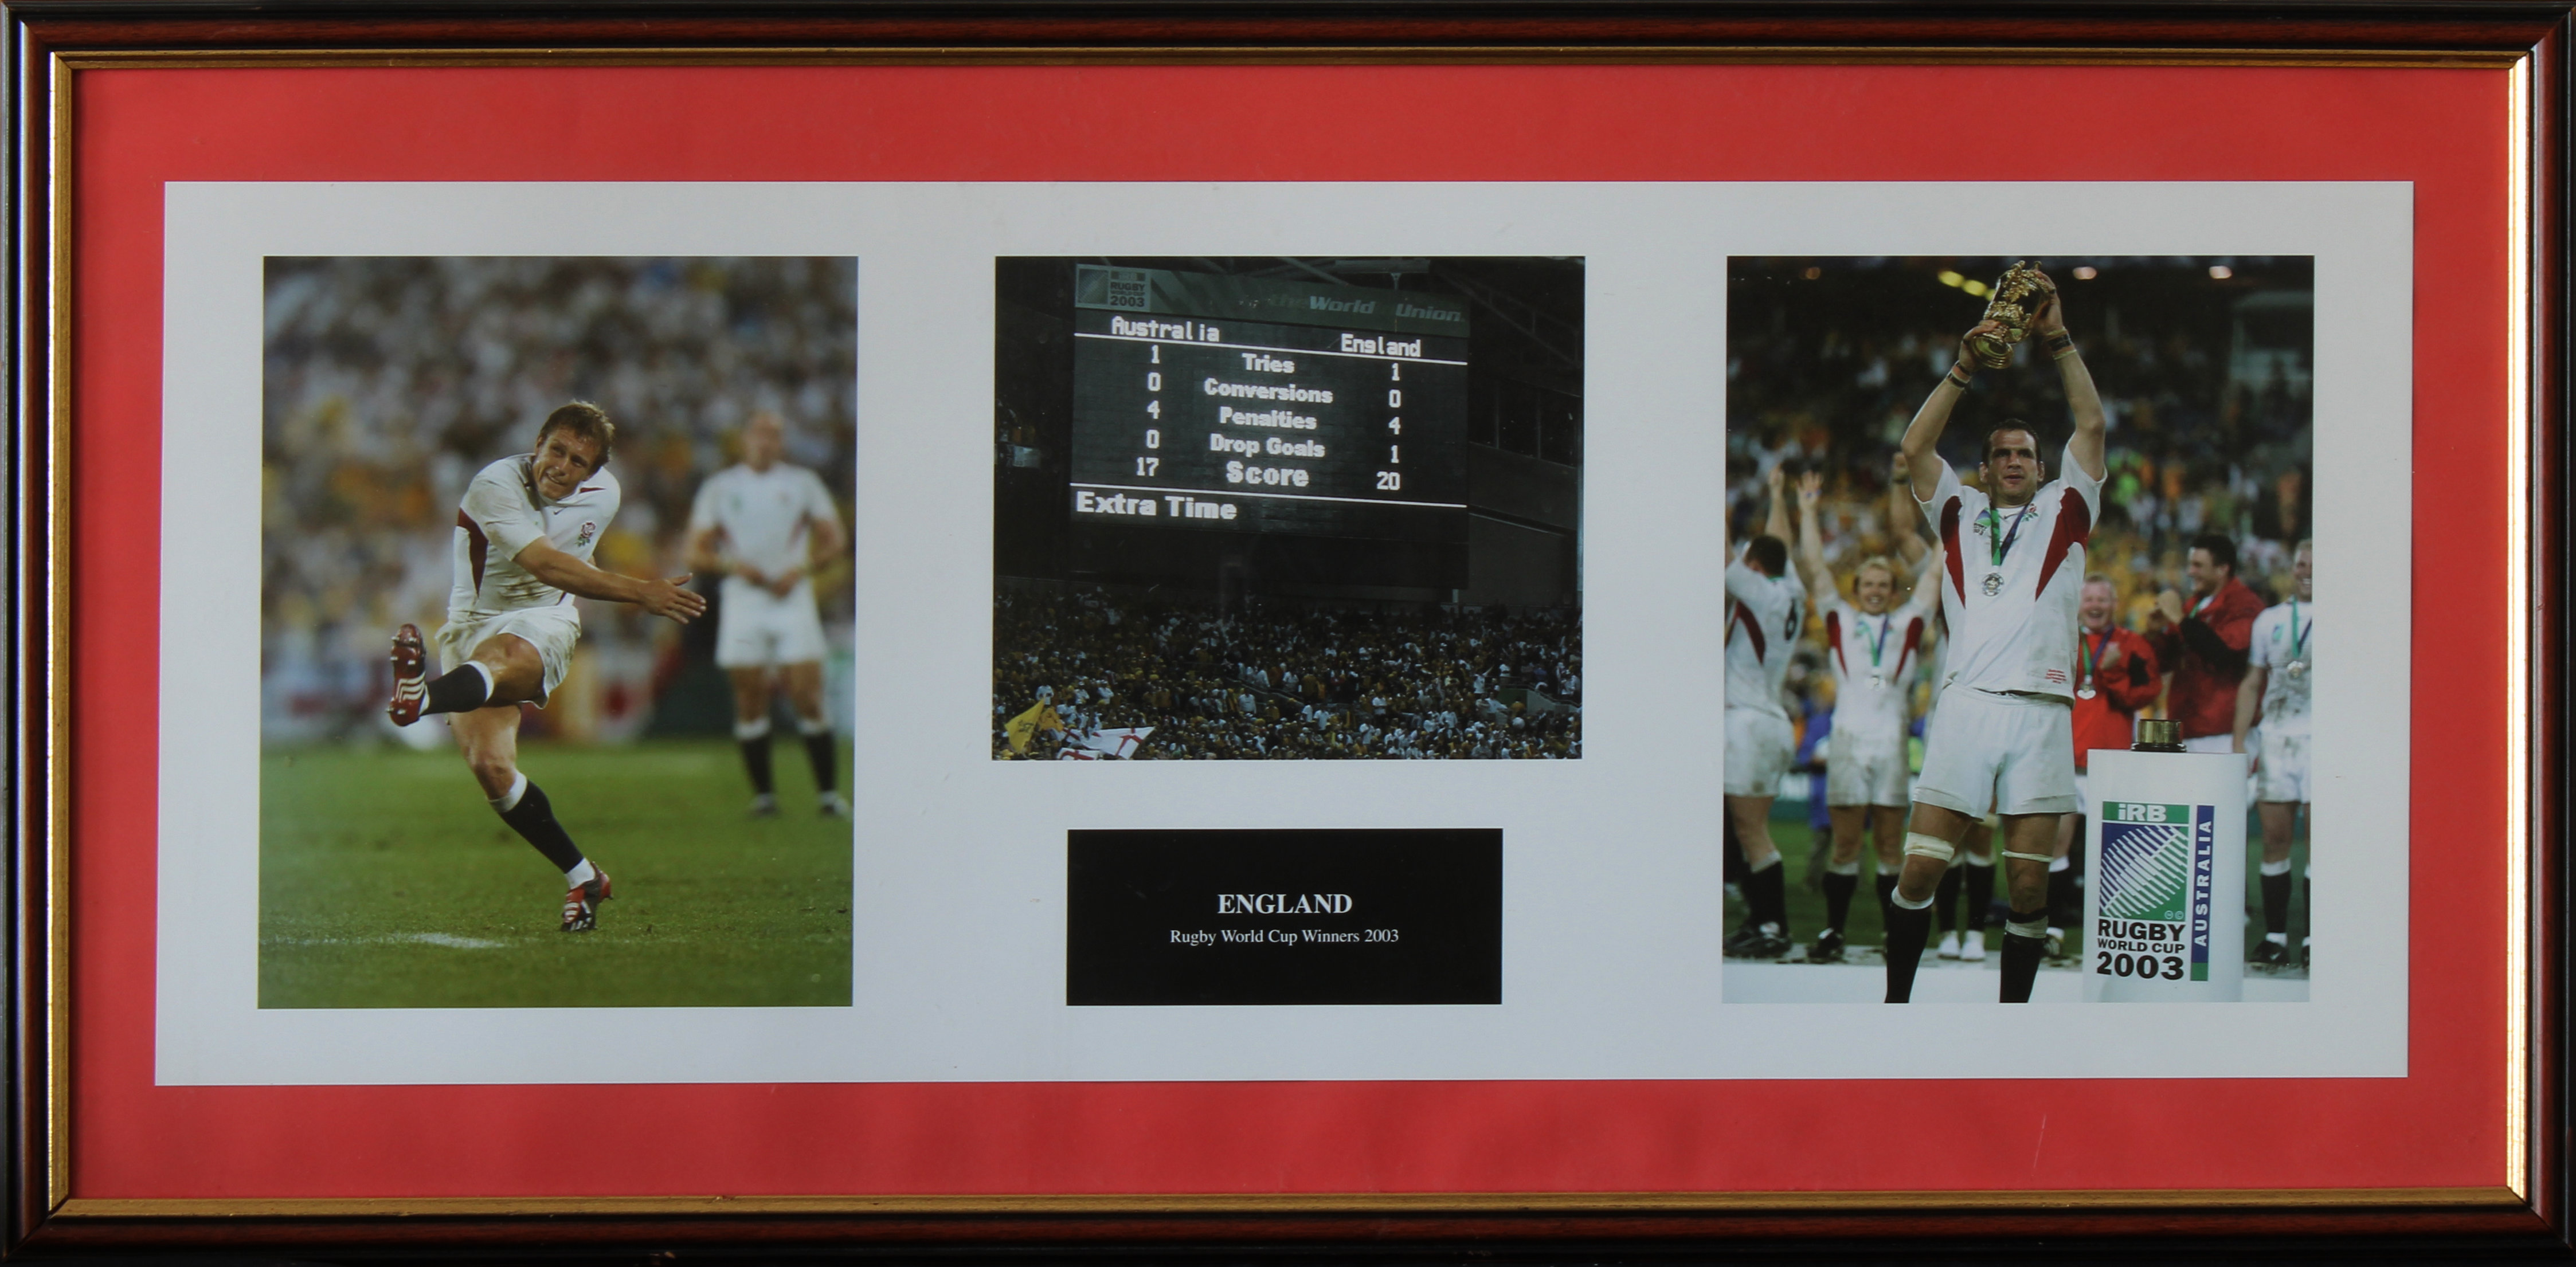 Rugby - Framed photograph print of Johnny Wilkinson kicking in the 2003 Rugby World Cup